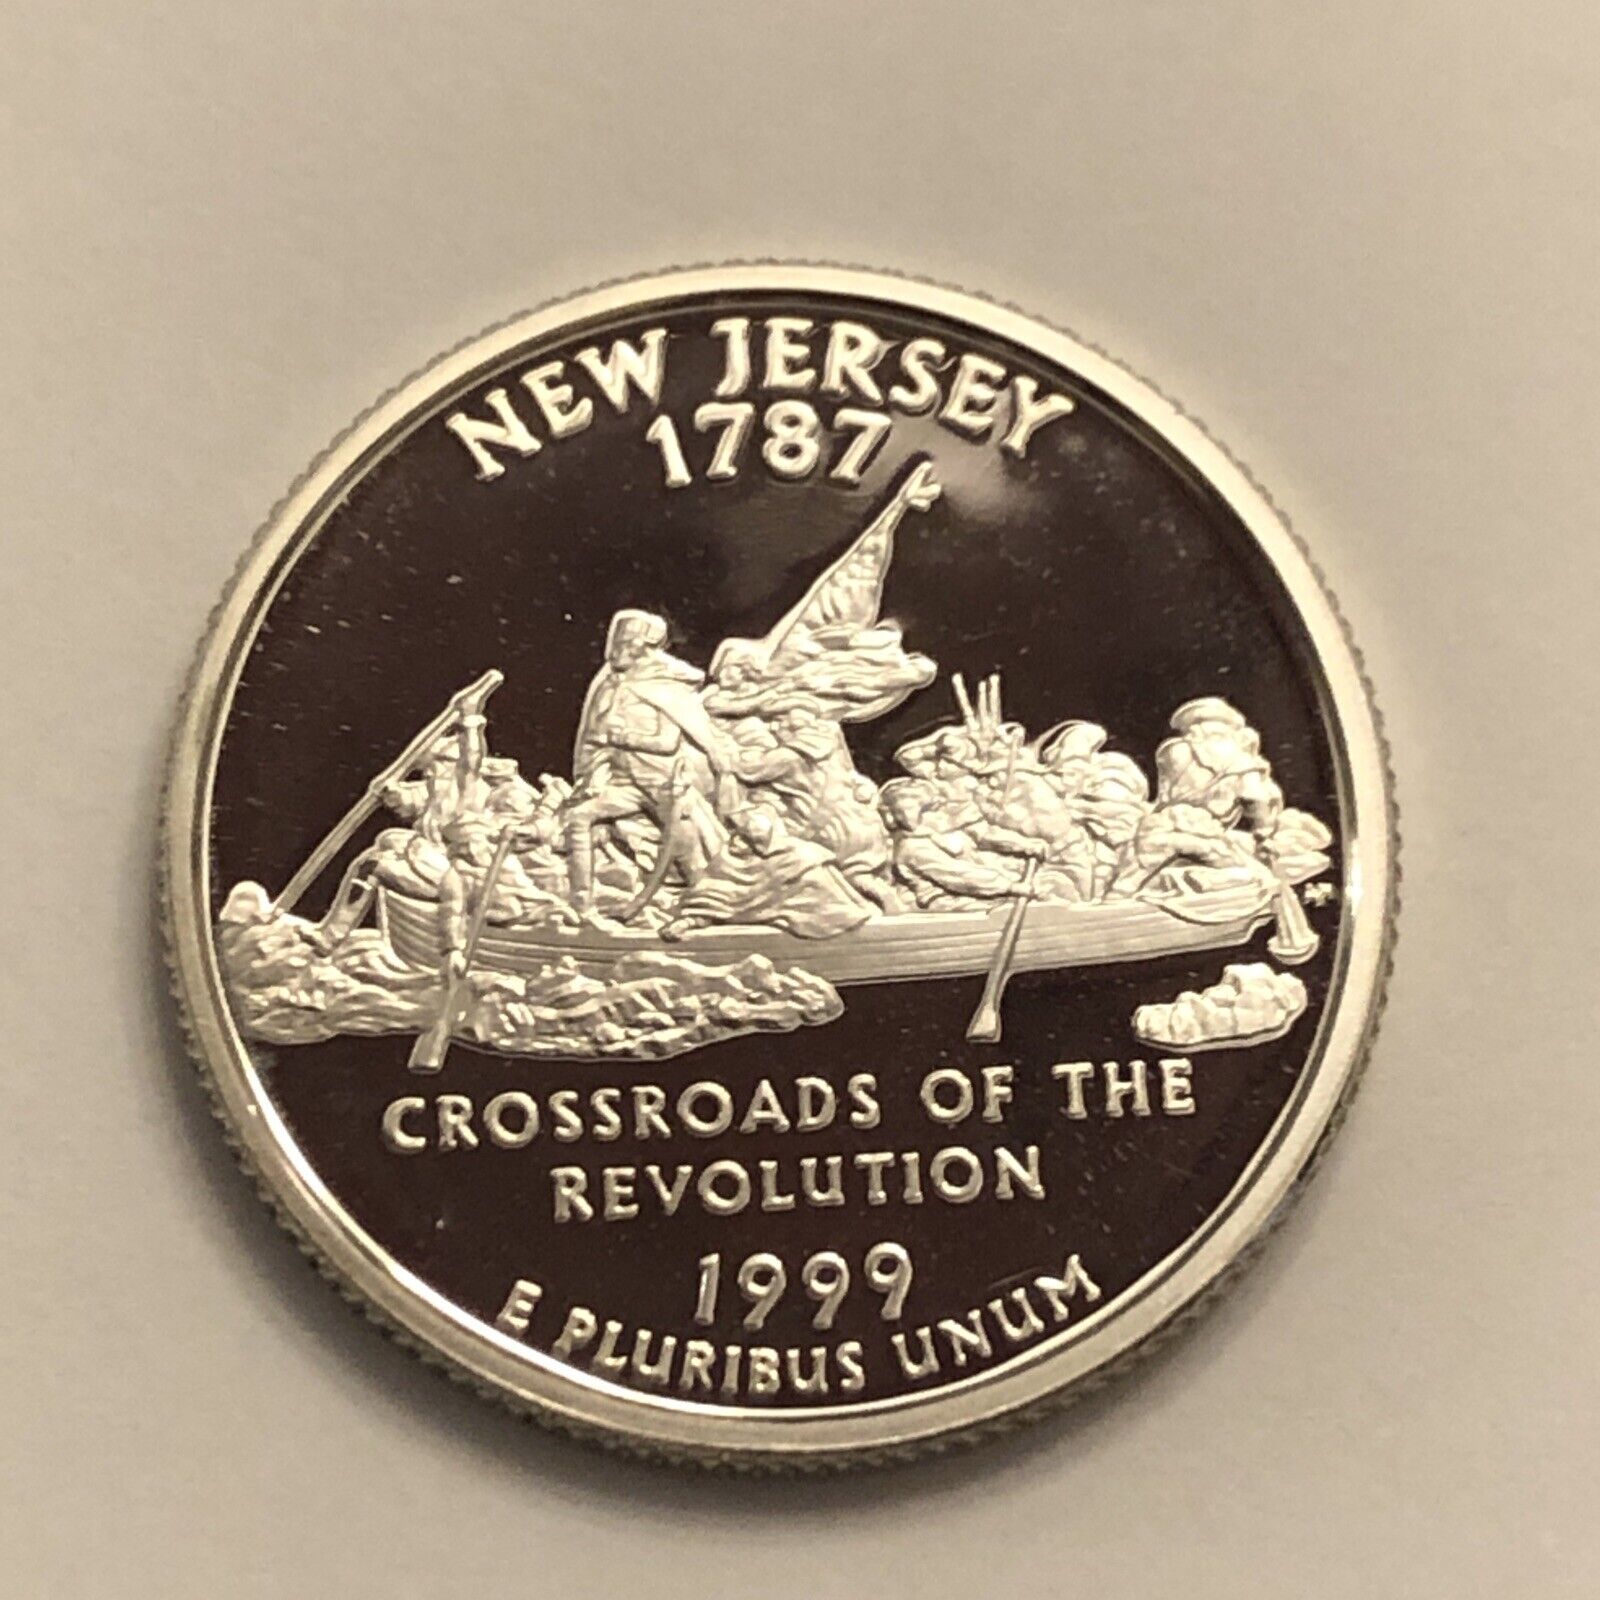 1999 S New Jersey *90% Silver Proof State Quarter Mint From Proof Set  #1999sq